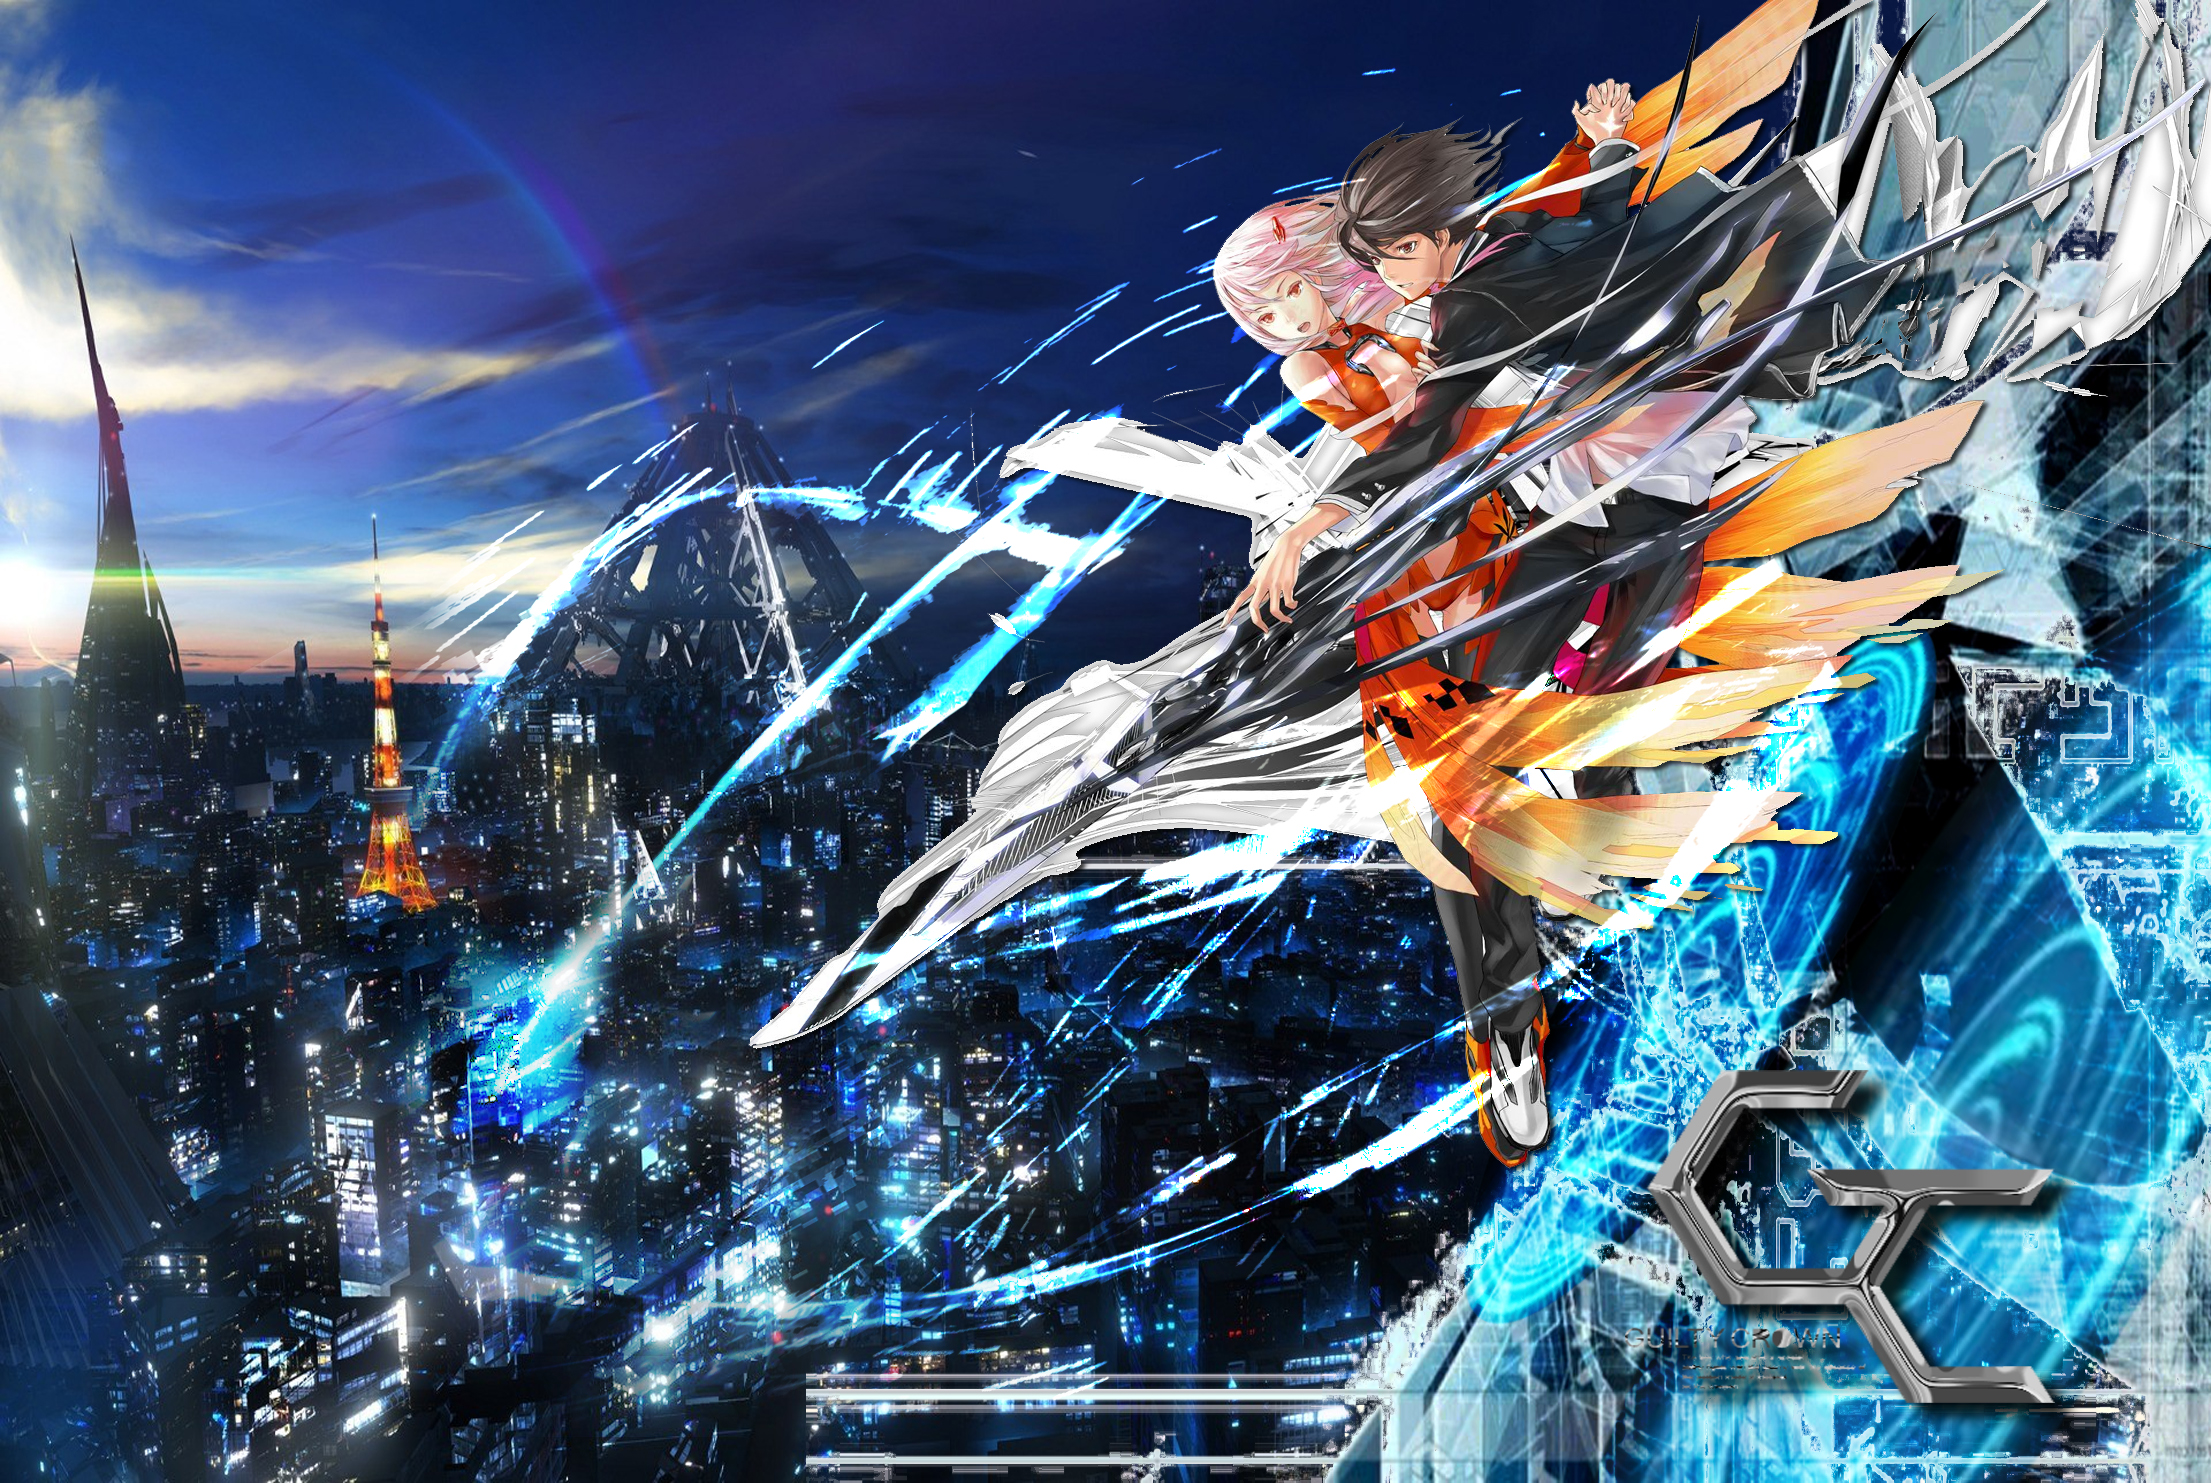 guilty crown download free